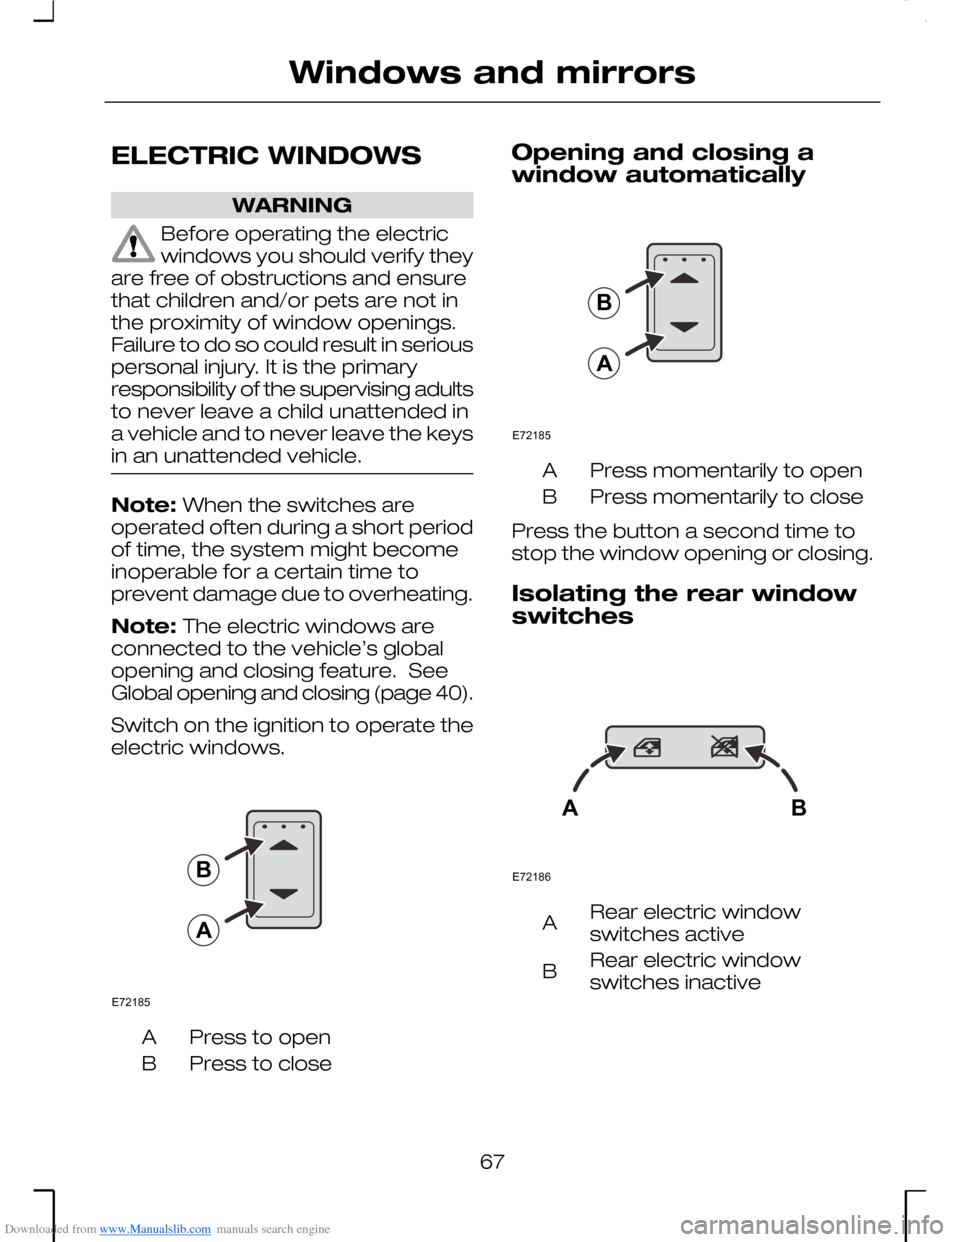 FORD MONDEO 2006 2.G Owners Manual Downloaded from www.Manualslib.com manuals search engine ELECTRIC WINDOWS
WARNING
Before operating the electricwindows you should verify theyare free of obstructions and ensurethat children and/or pet